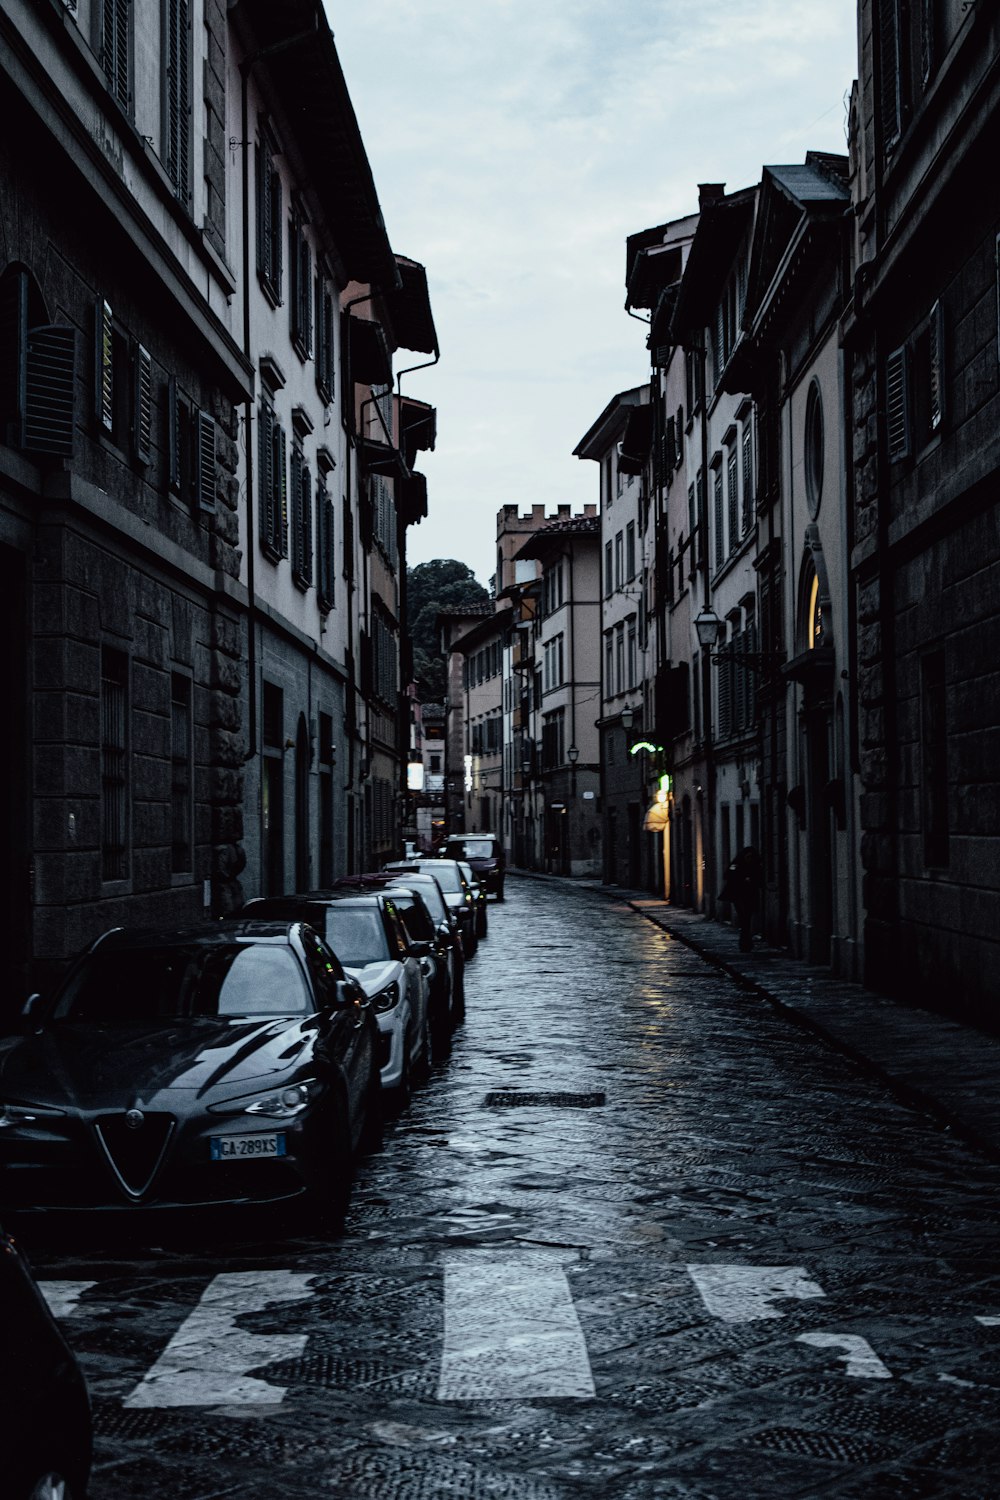 a city street lined with parked cars under a cloudy sky